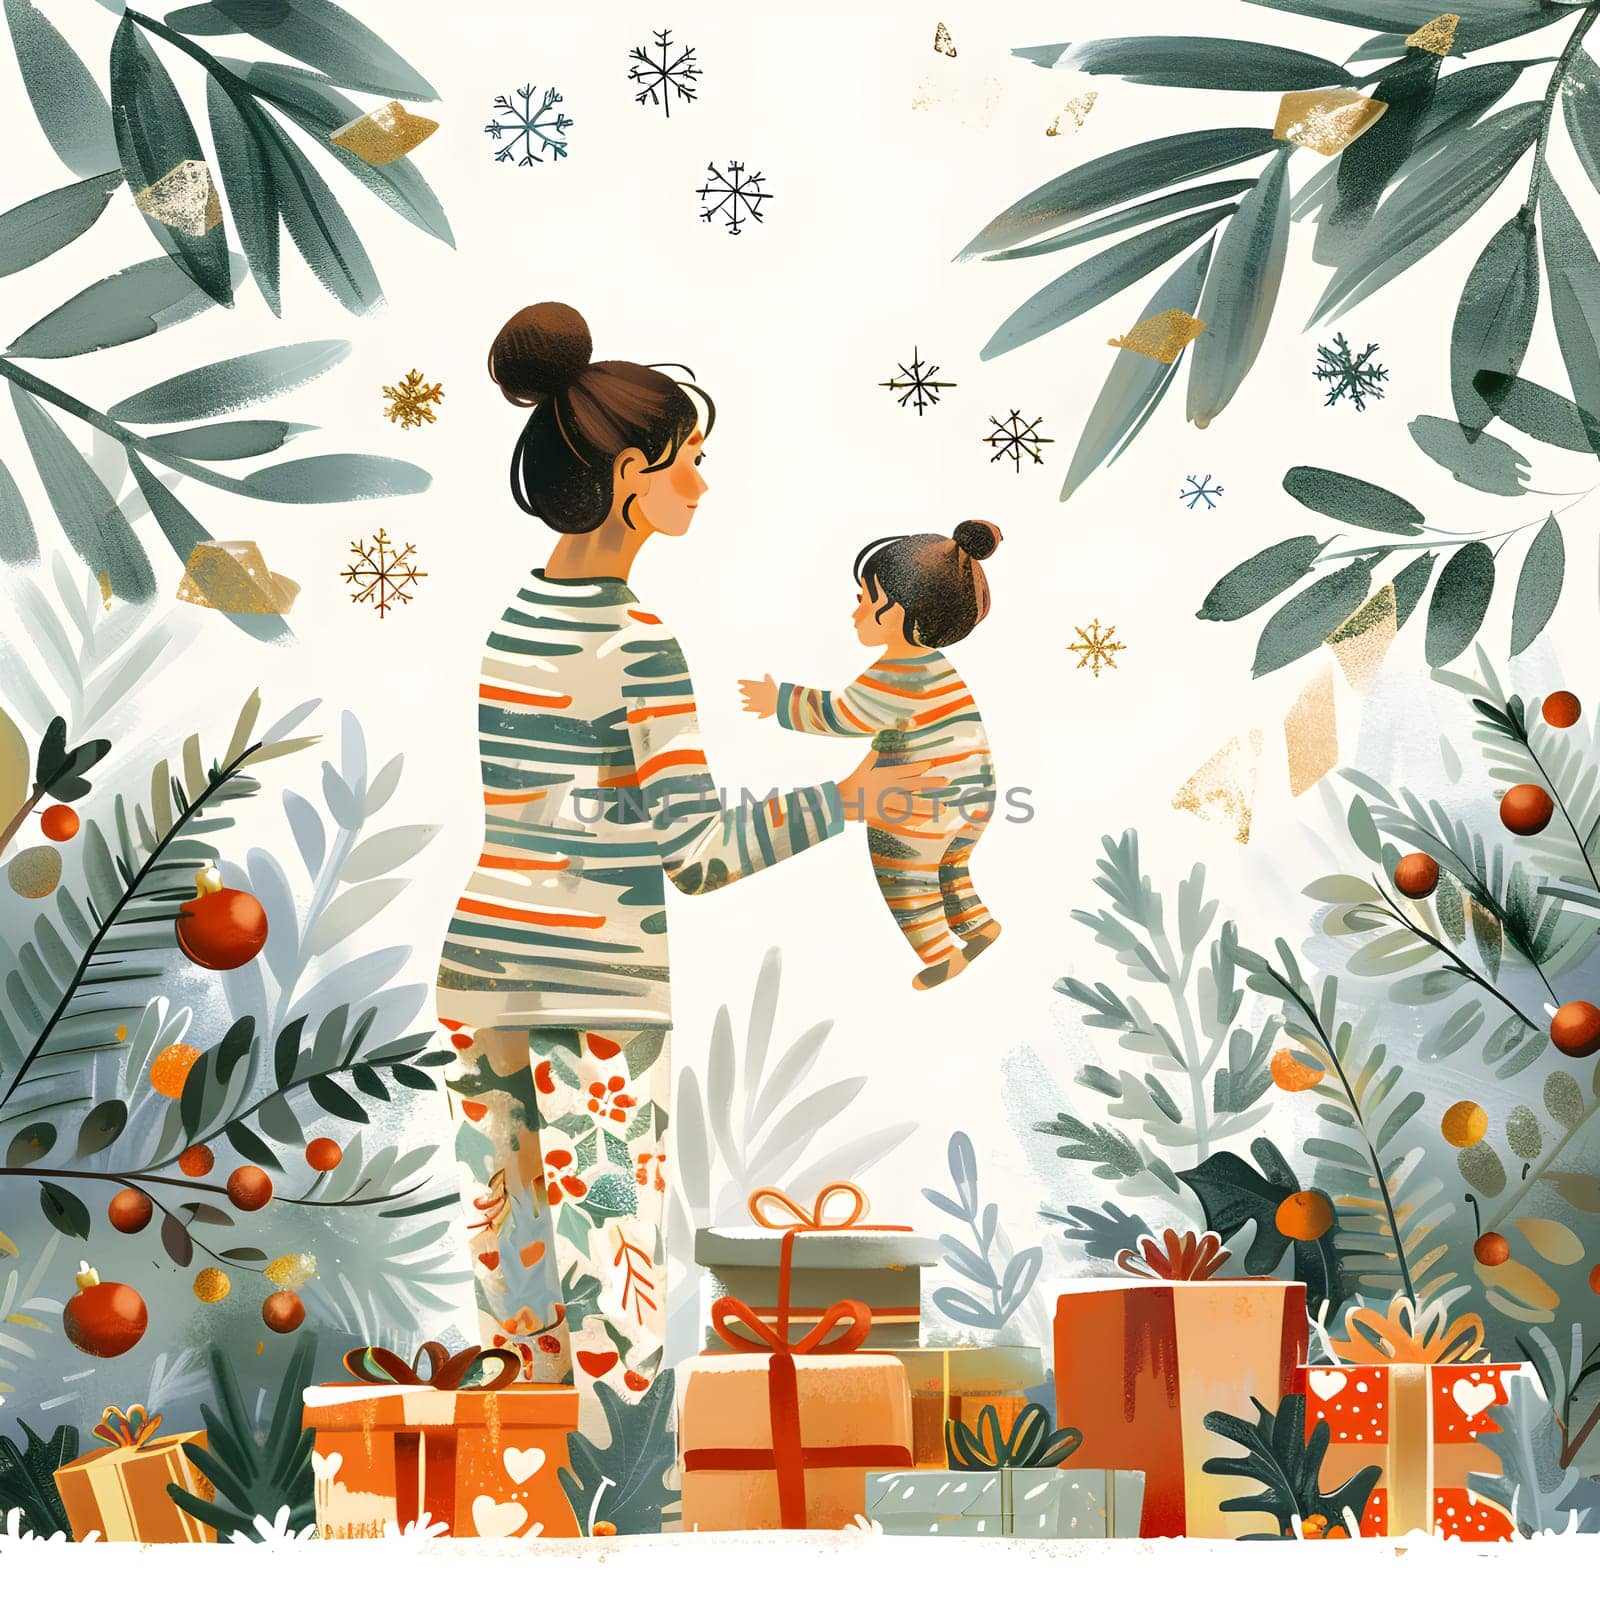 A woman cradles a baby in her arms while surrounded by festive Christmas decorations. The scene includes leafy plants, textiles with intricate patterns, and happy people in nature